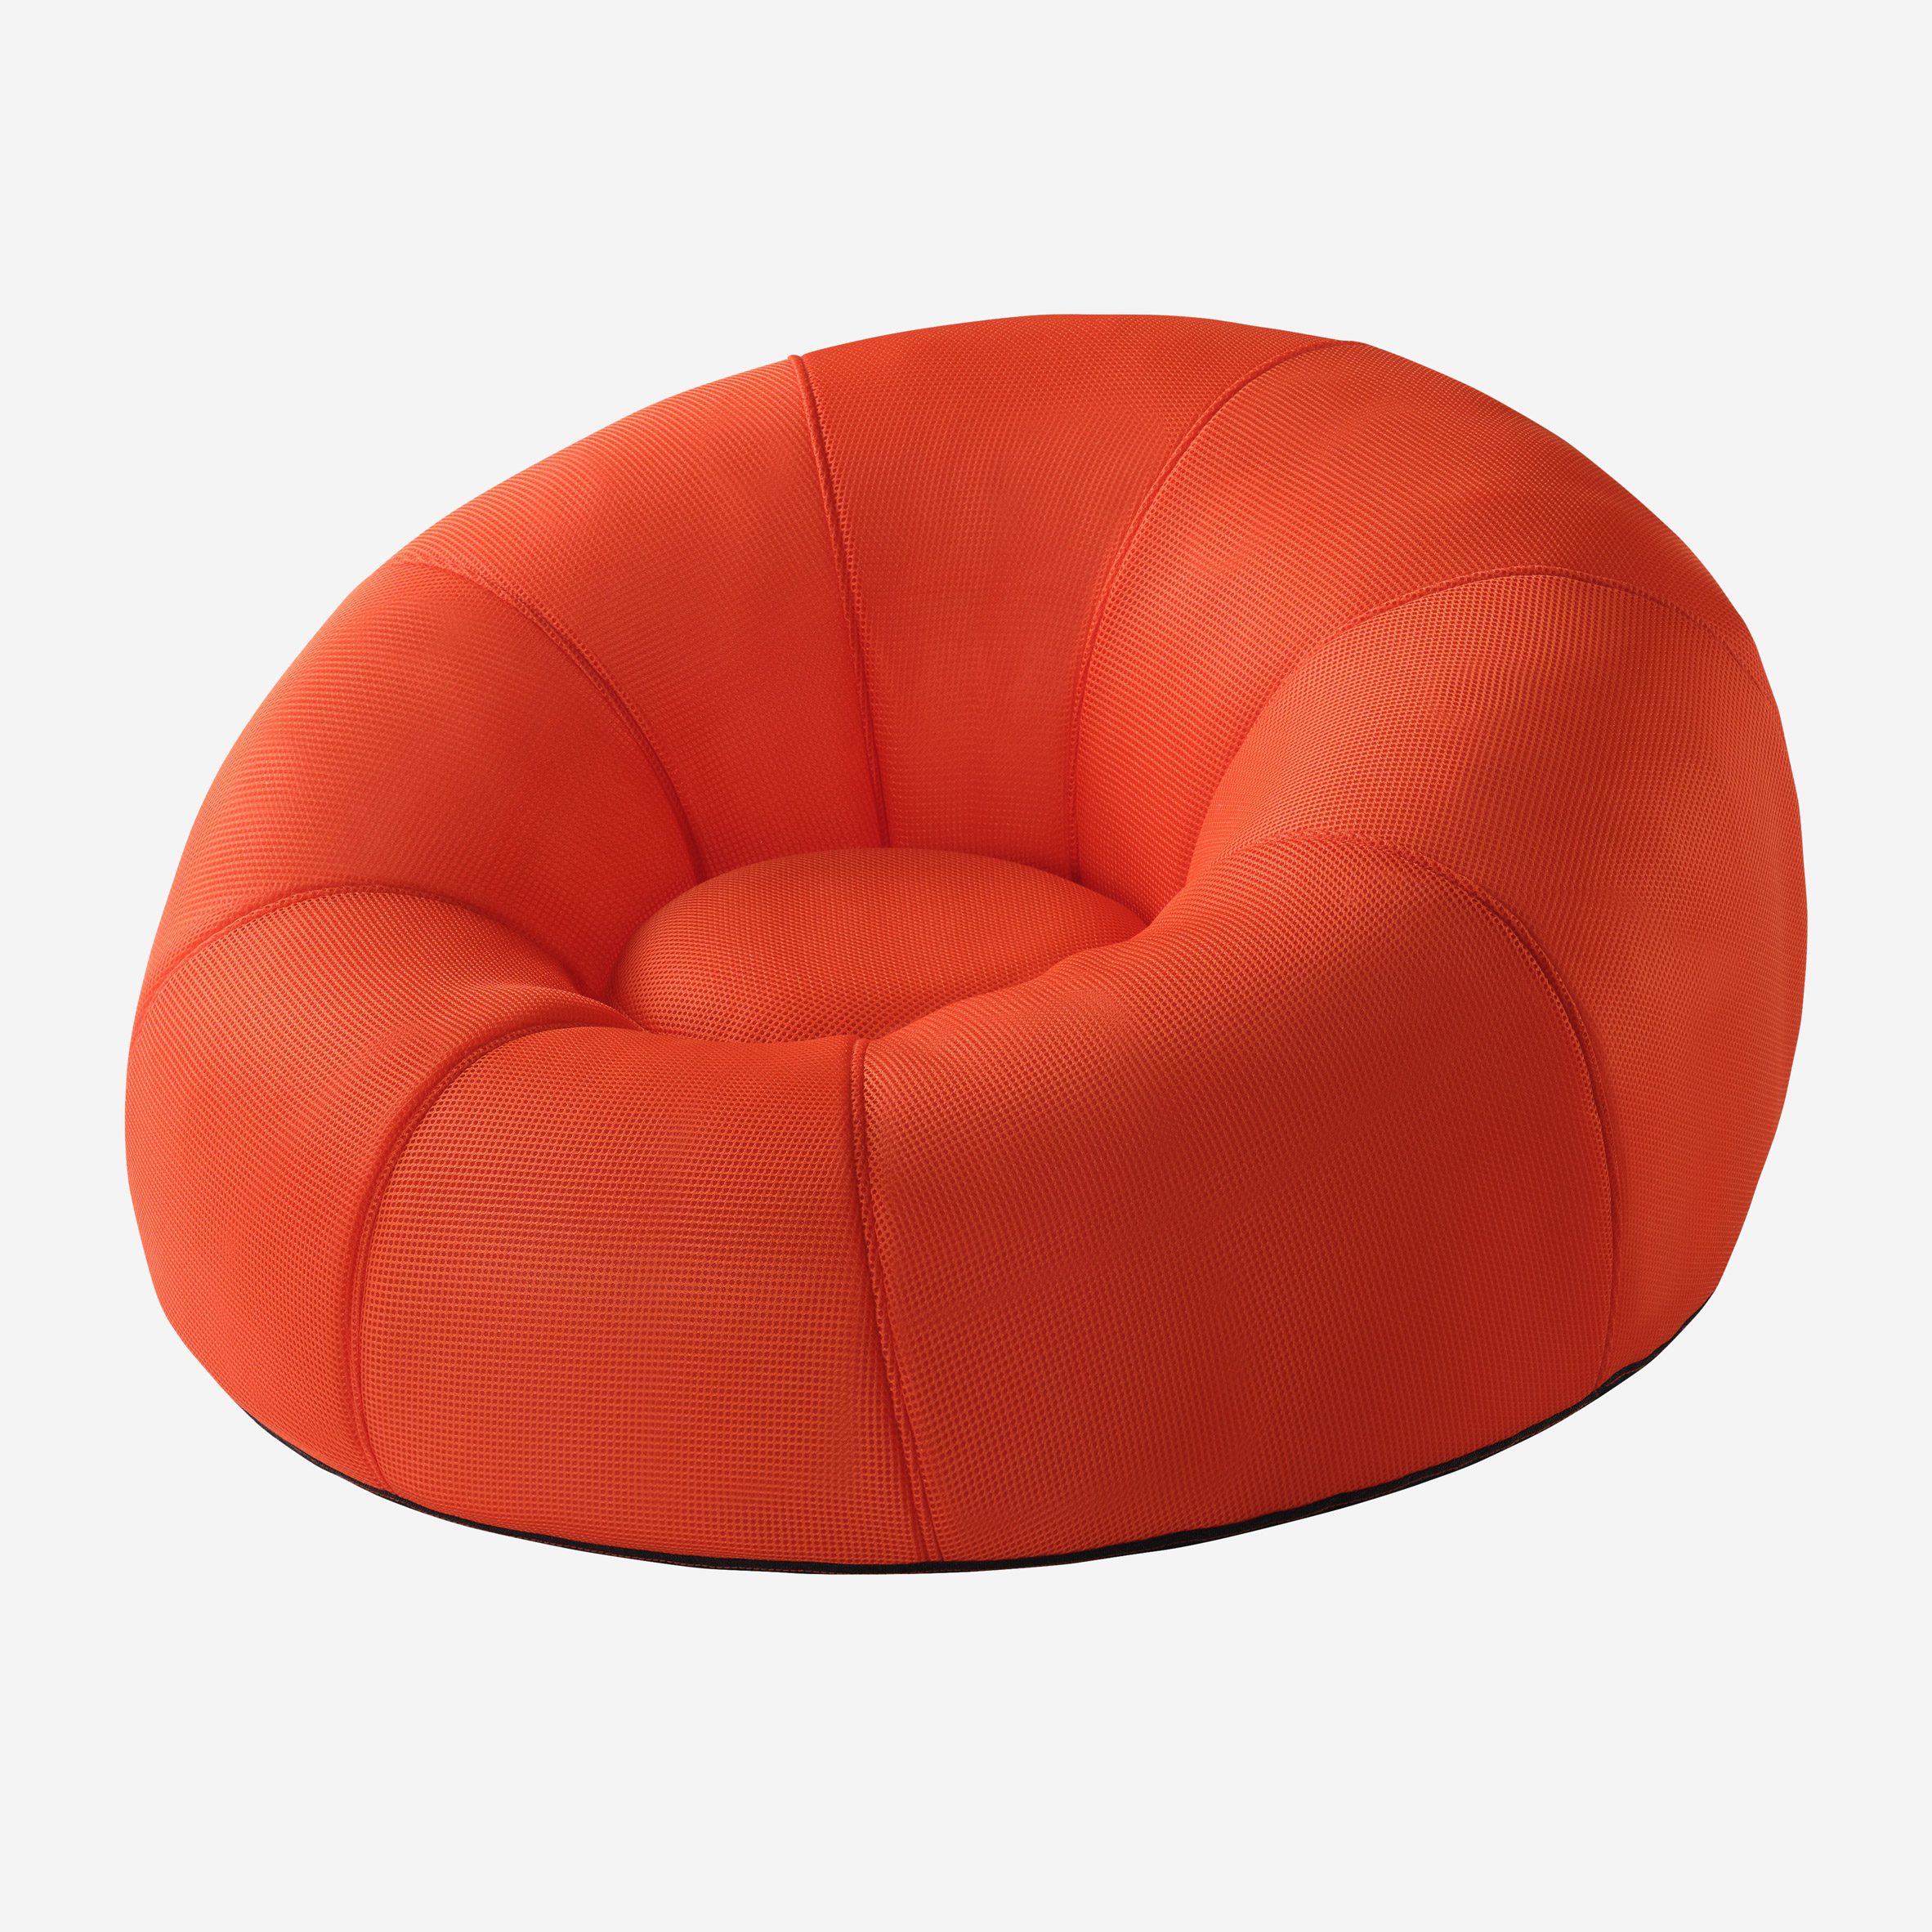 Inflatable chair by IKEA